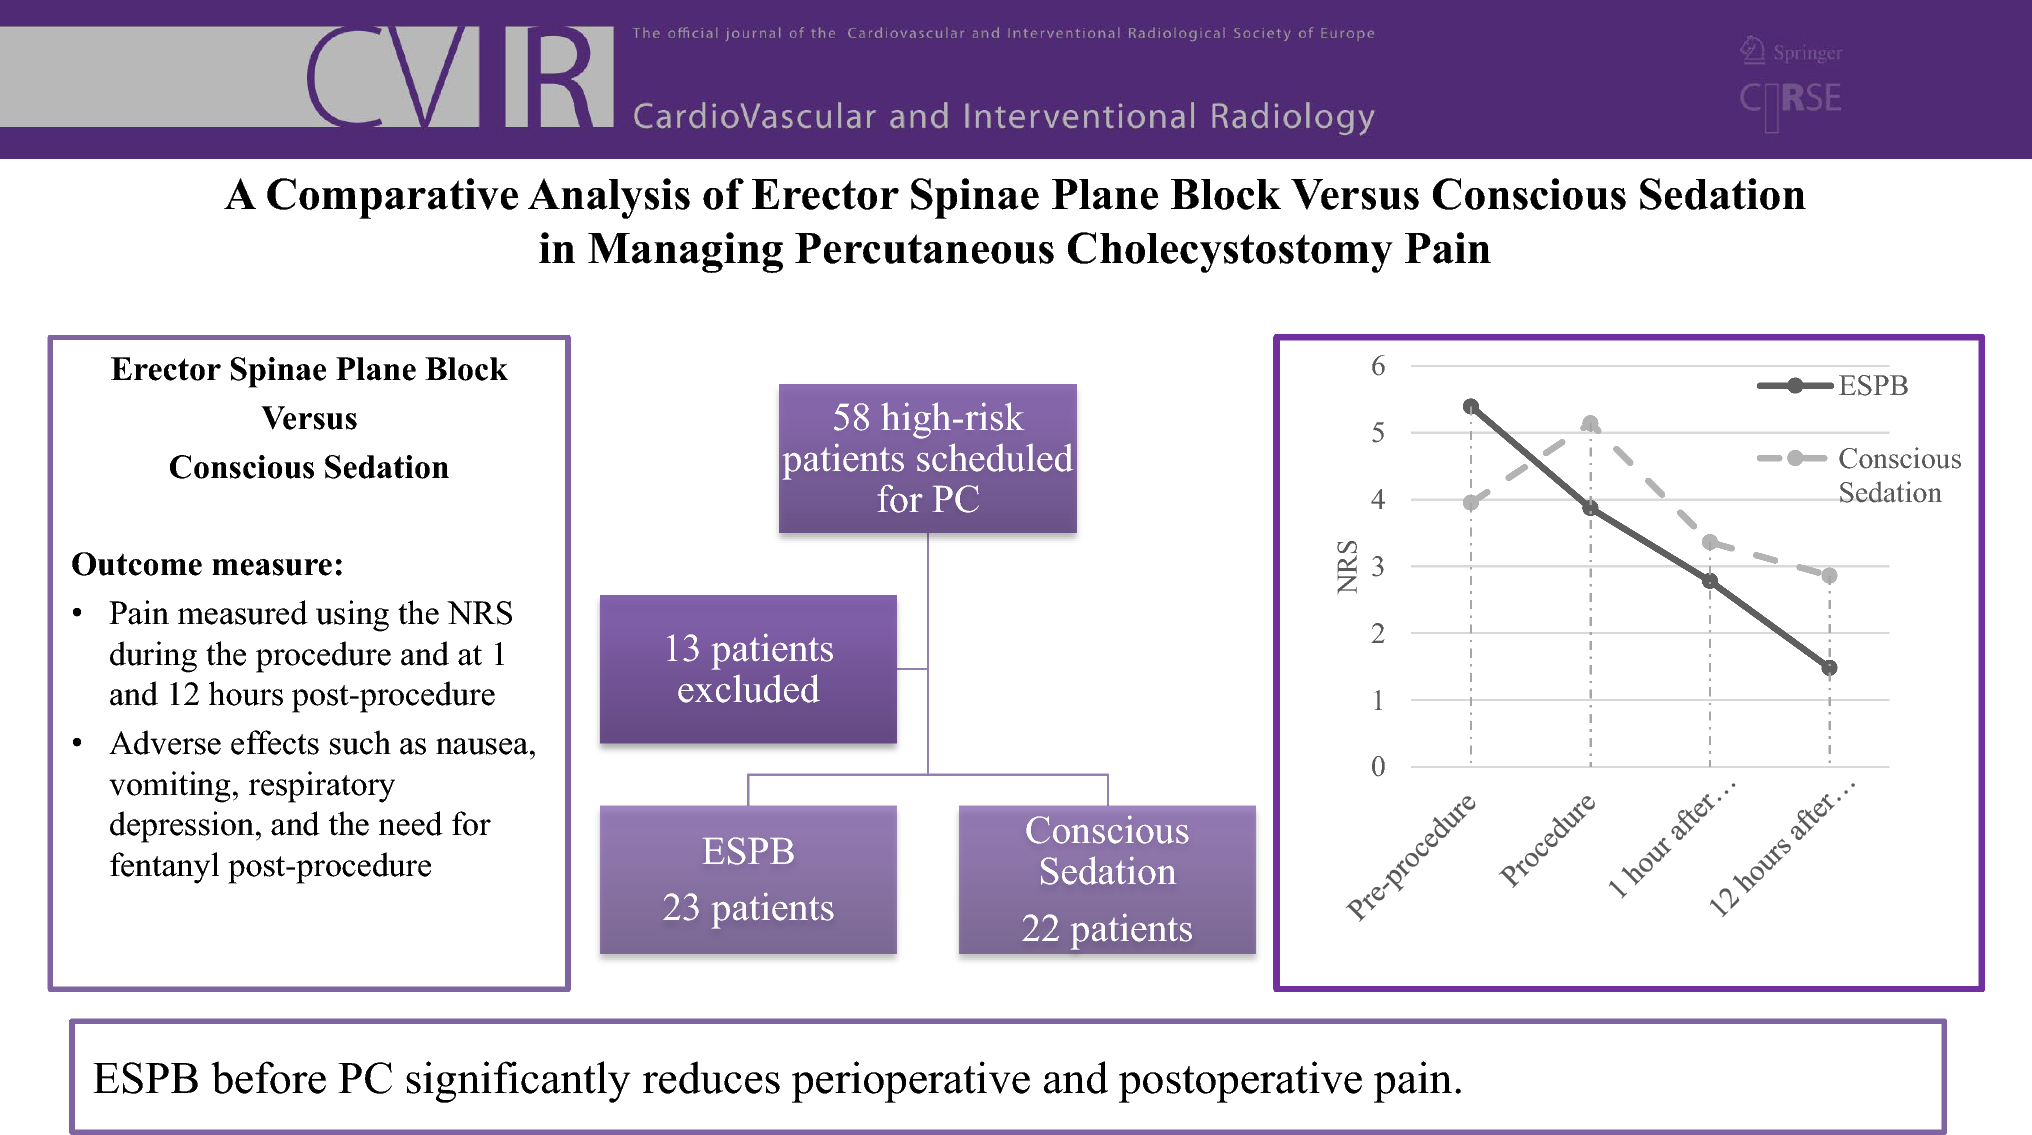 A Comparative Analysis of Erector Spinae Plane Block Versus Conscious Sedation in Managing Percutaneous Cholecystostomy Pain